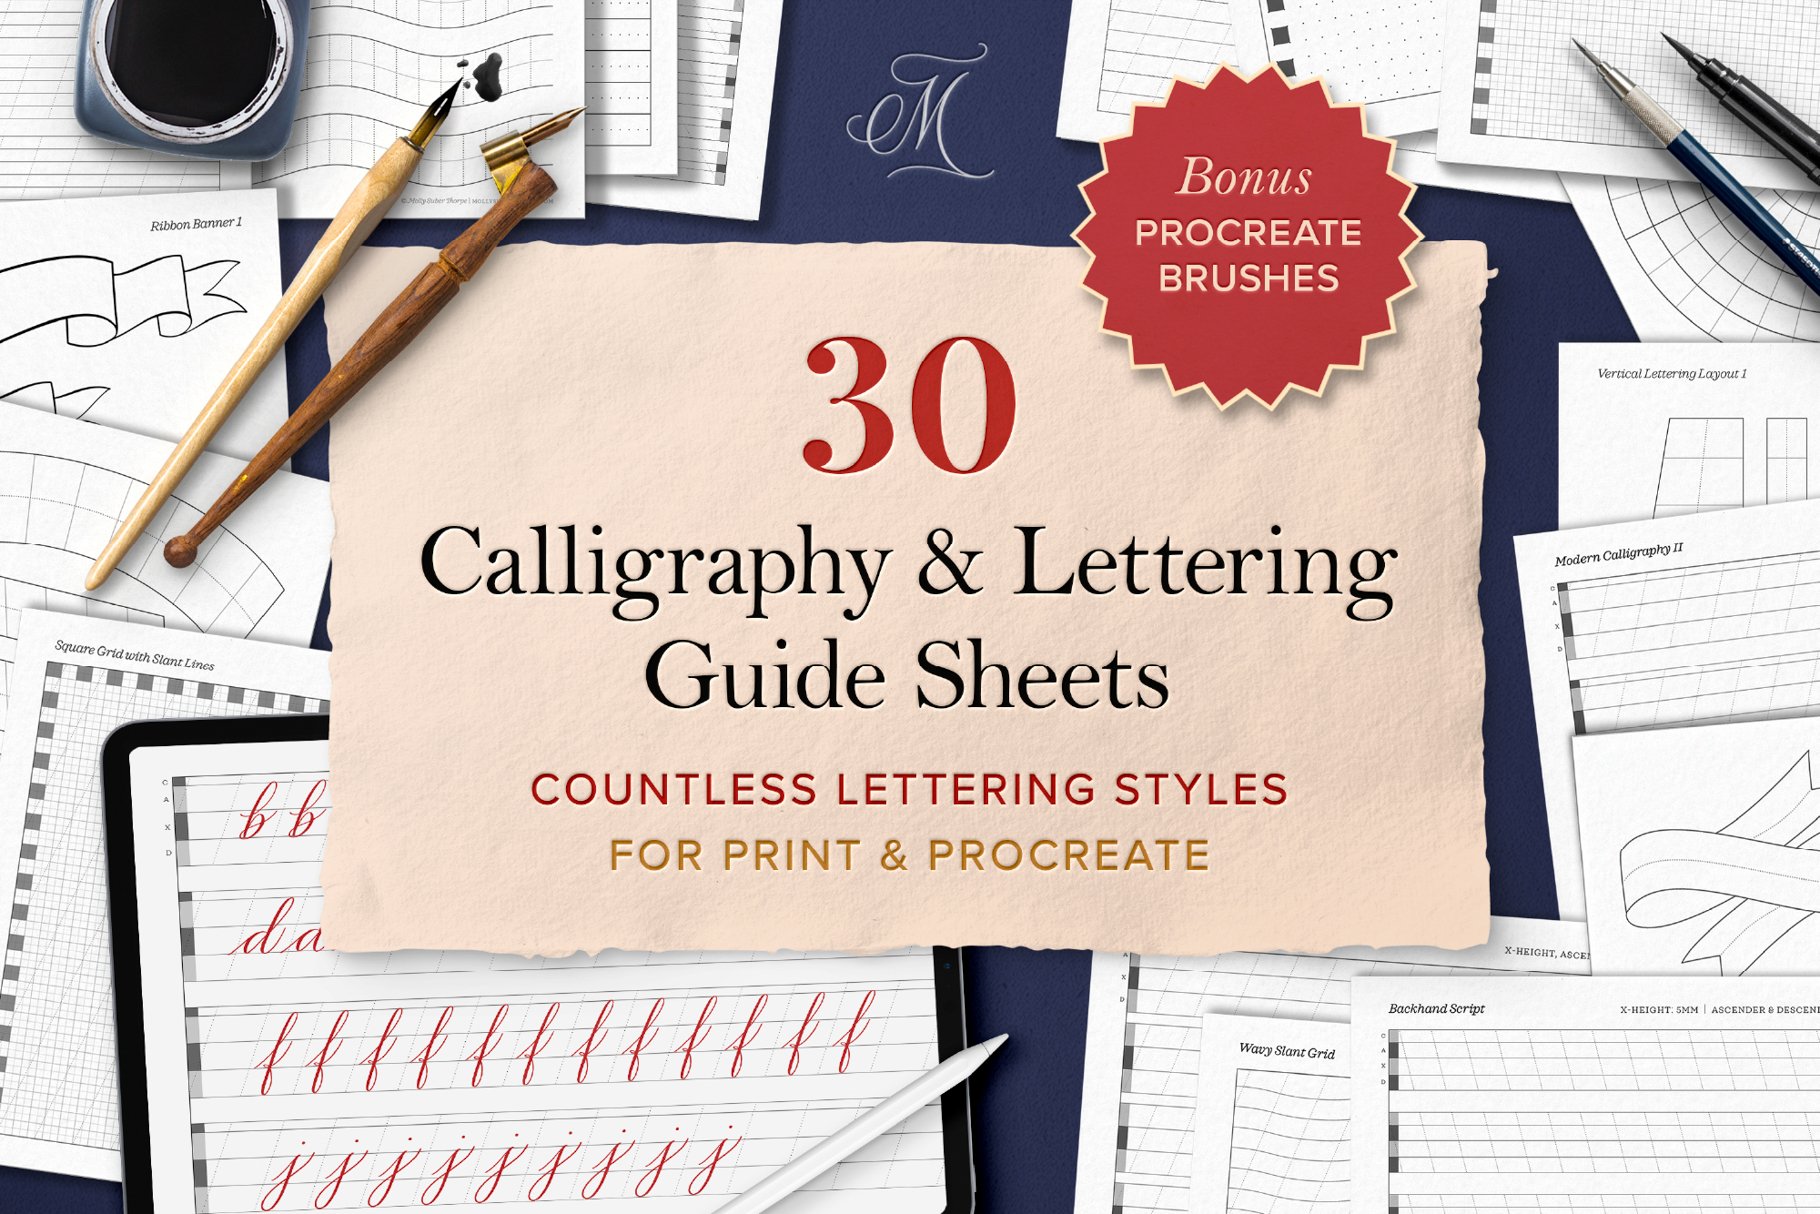 Handwriting Practice Notebook For Adults: Practice Handlettering or  Calligraphy. Dash and Square Practice Sheets. Practice for Your Creative  lettering. by Wave Three Press, Paperback